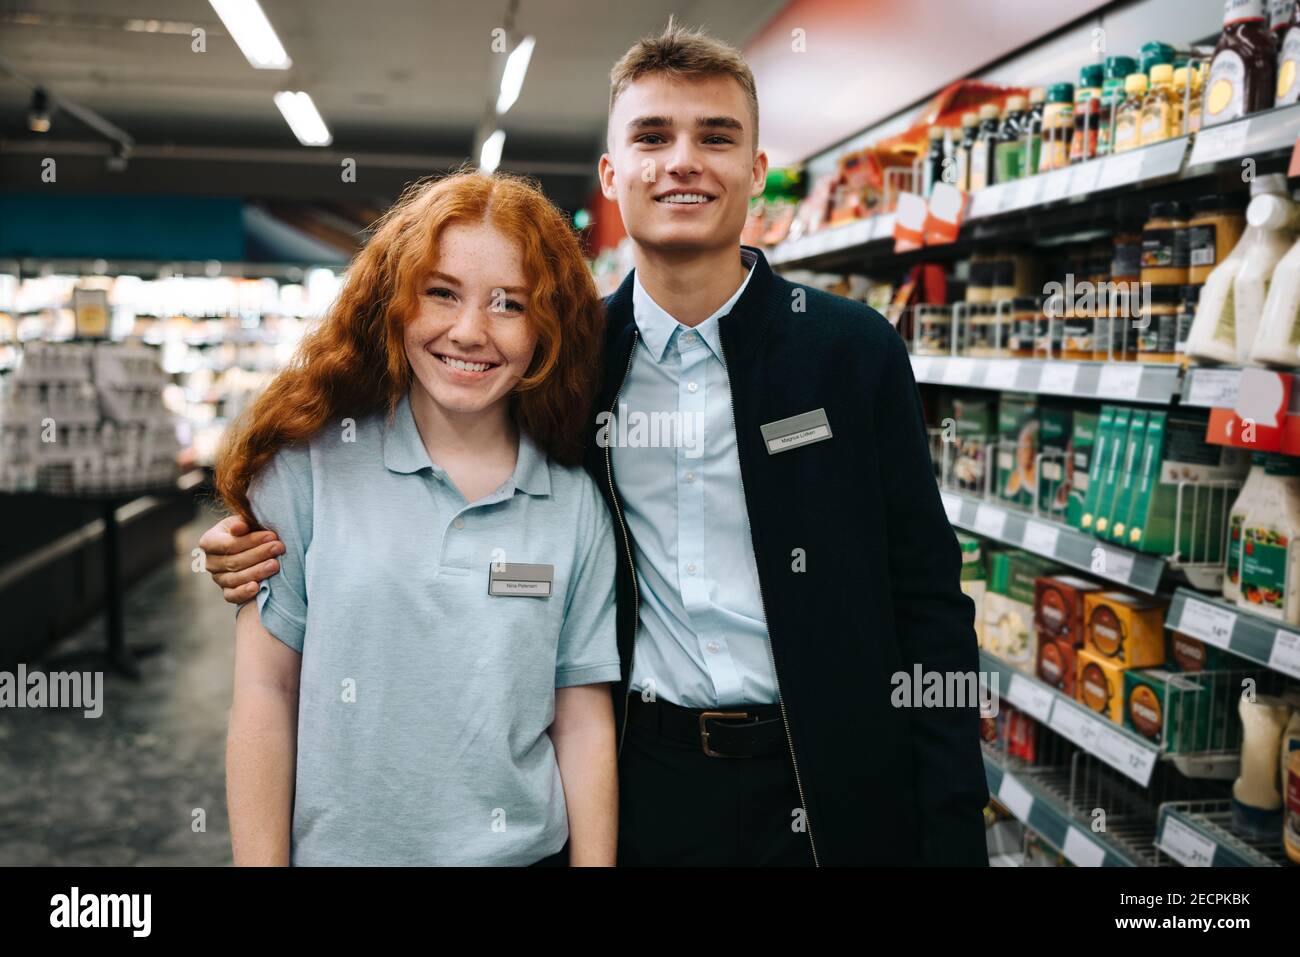 Trainee employees of supermarket. Man and woman standing together and looking at camera in grocery store. Stock Photo